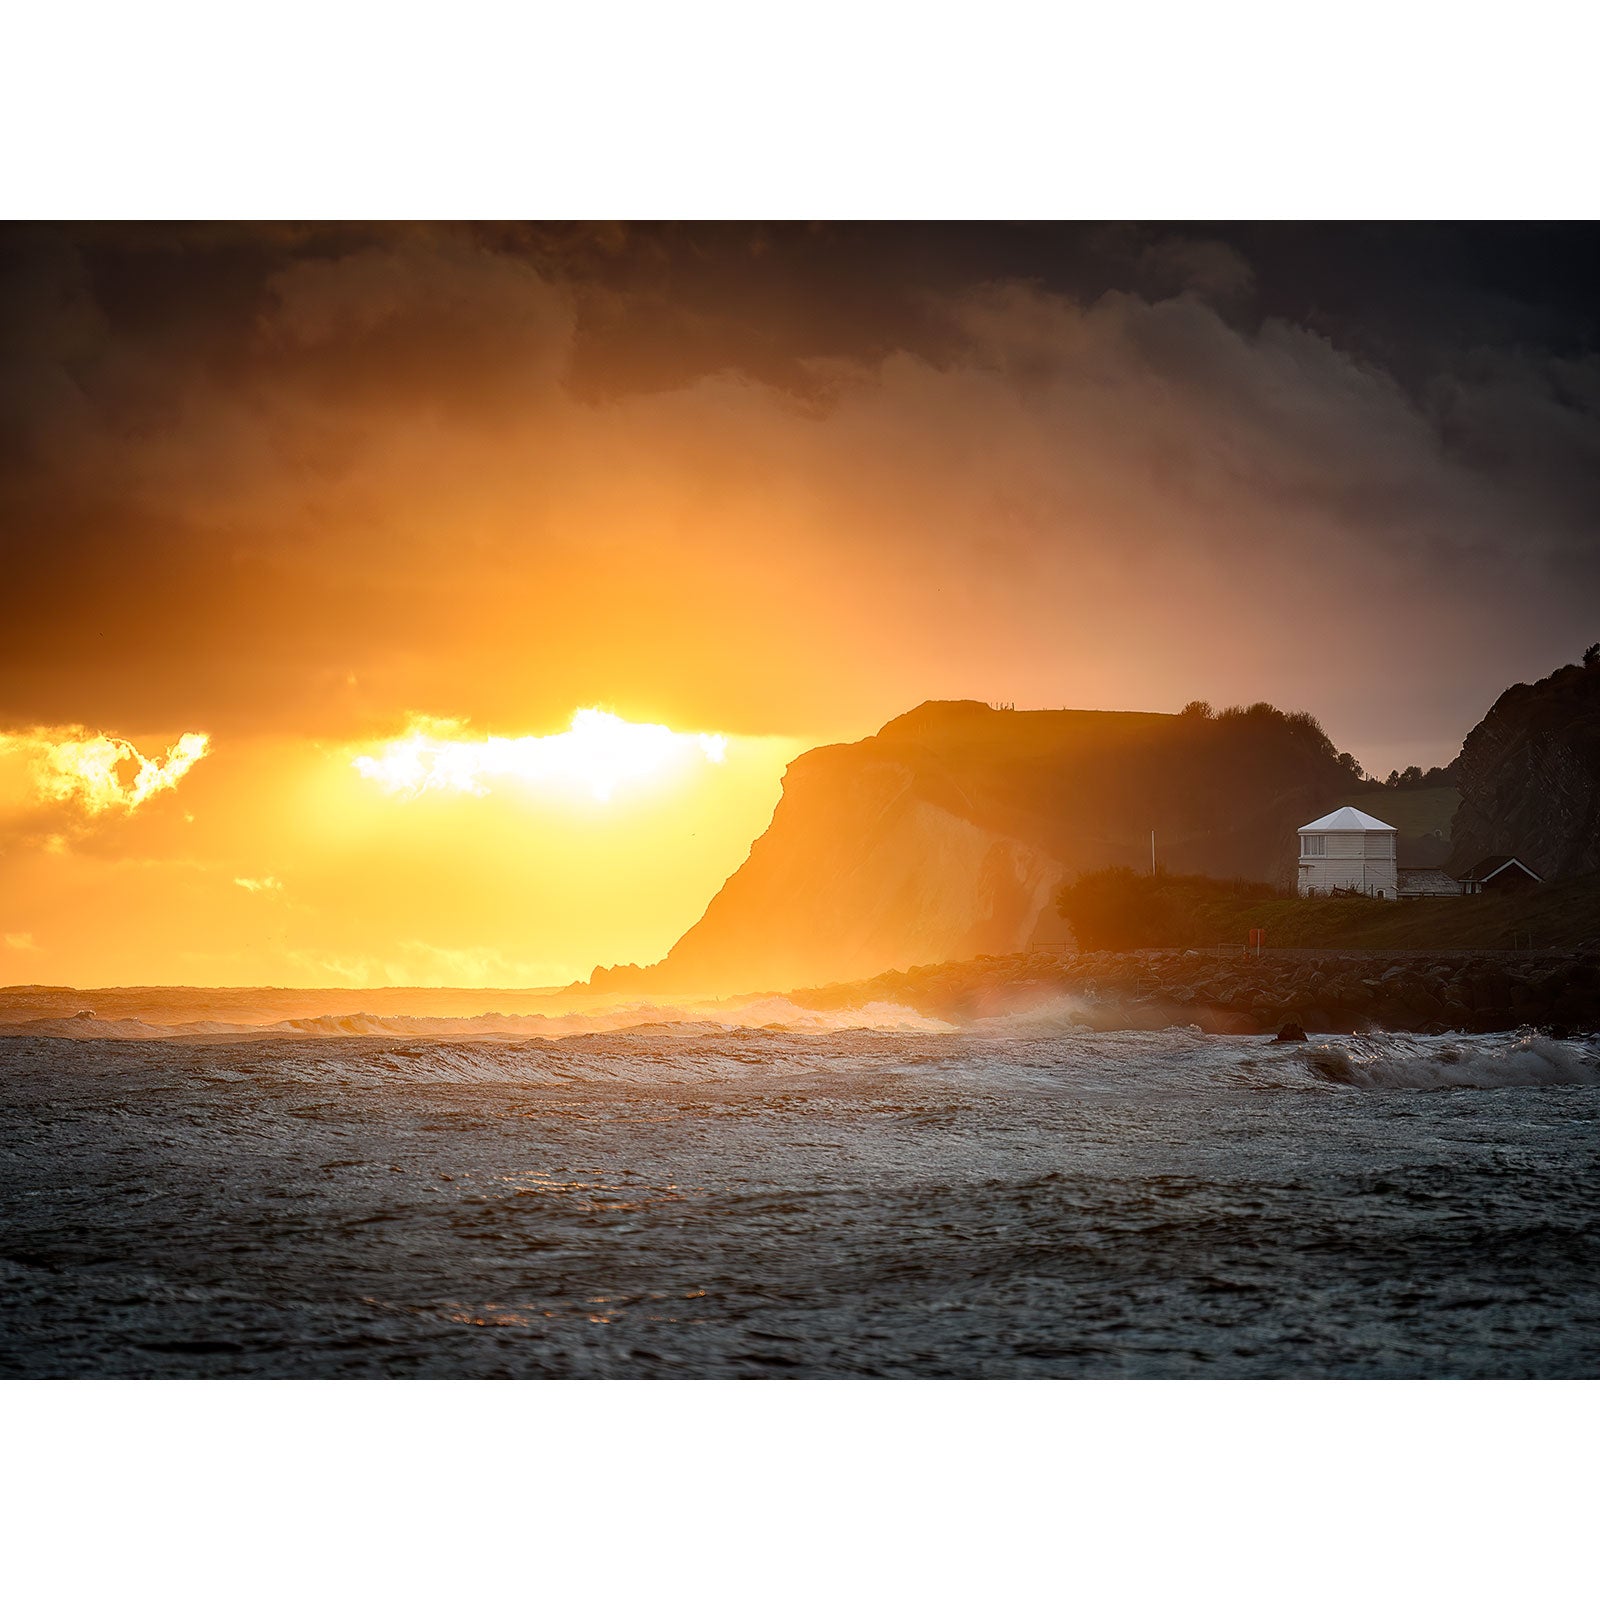 Sunset glowing behind stormy seas with silhouette of cliffs in the background on the Isle of Wight captured by Woody Point from Ventnor by Available Light Photography.